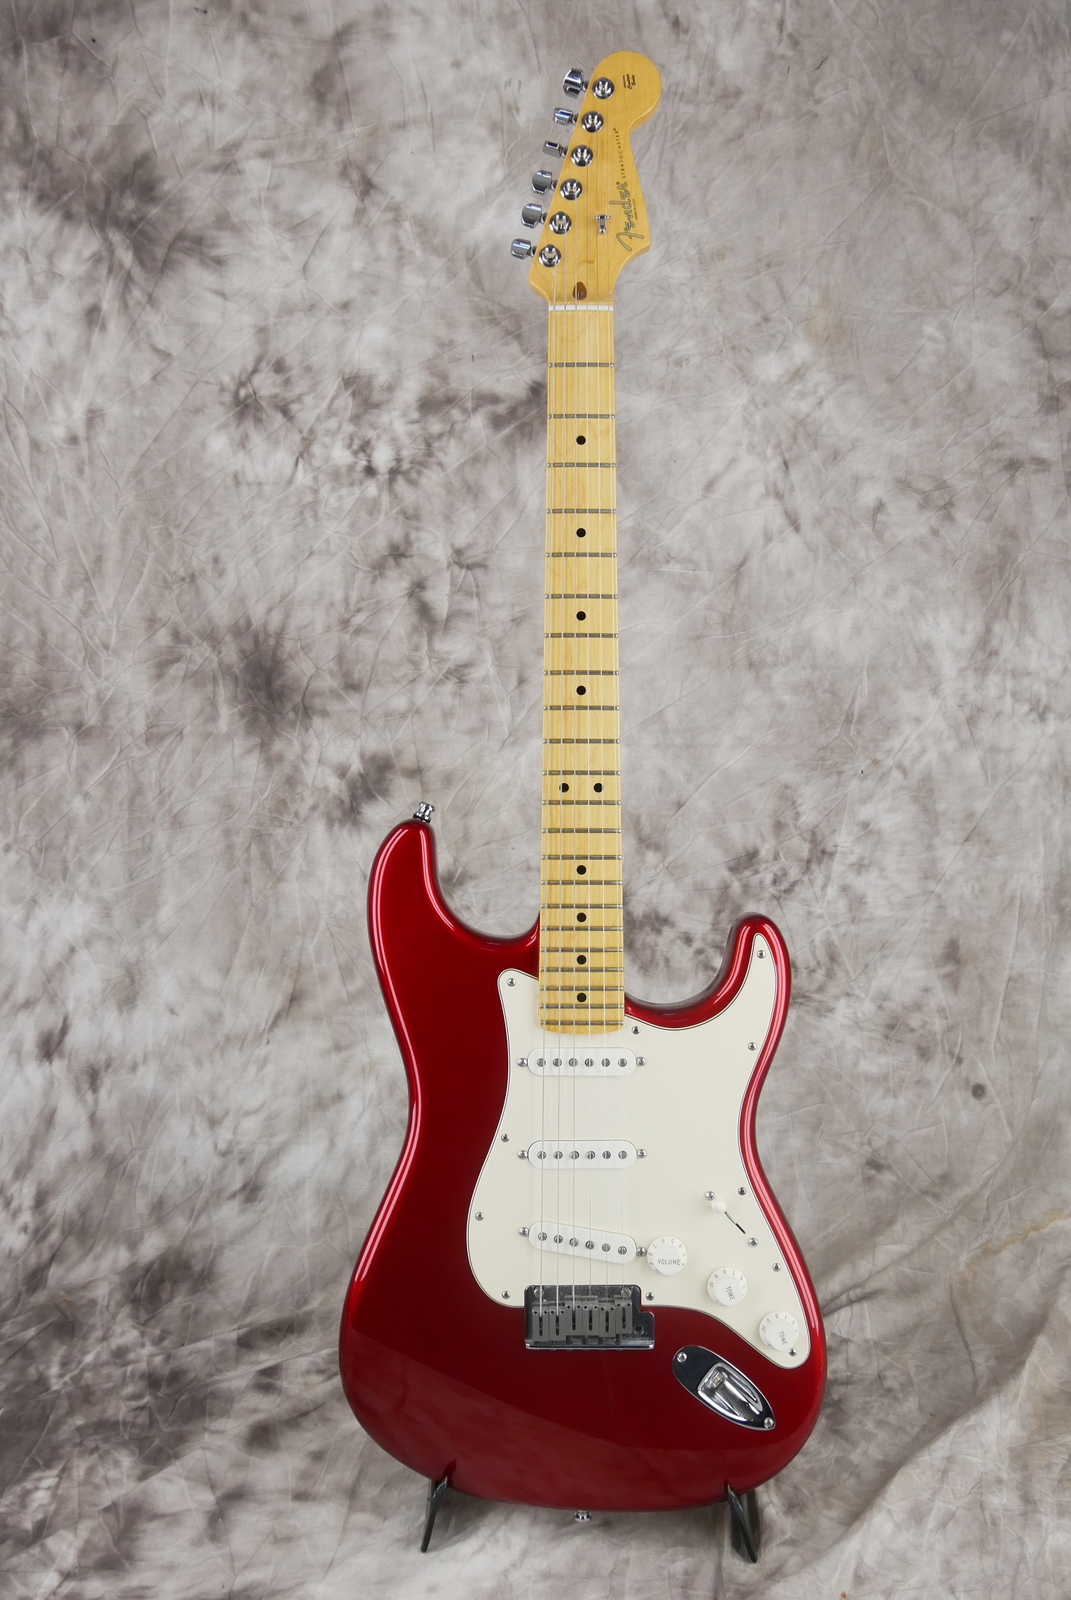 Fender_Stratocaster_USA_built_from_parts_candy_apple_red_2015-001.JPG